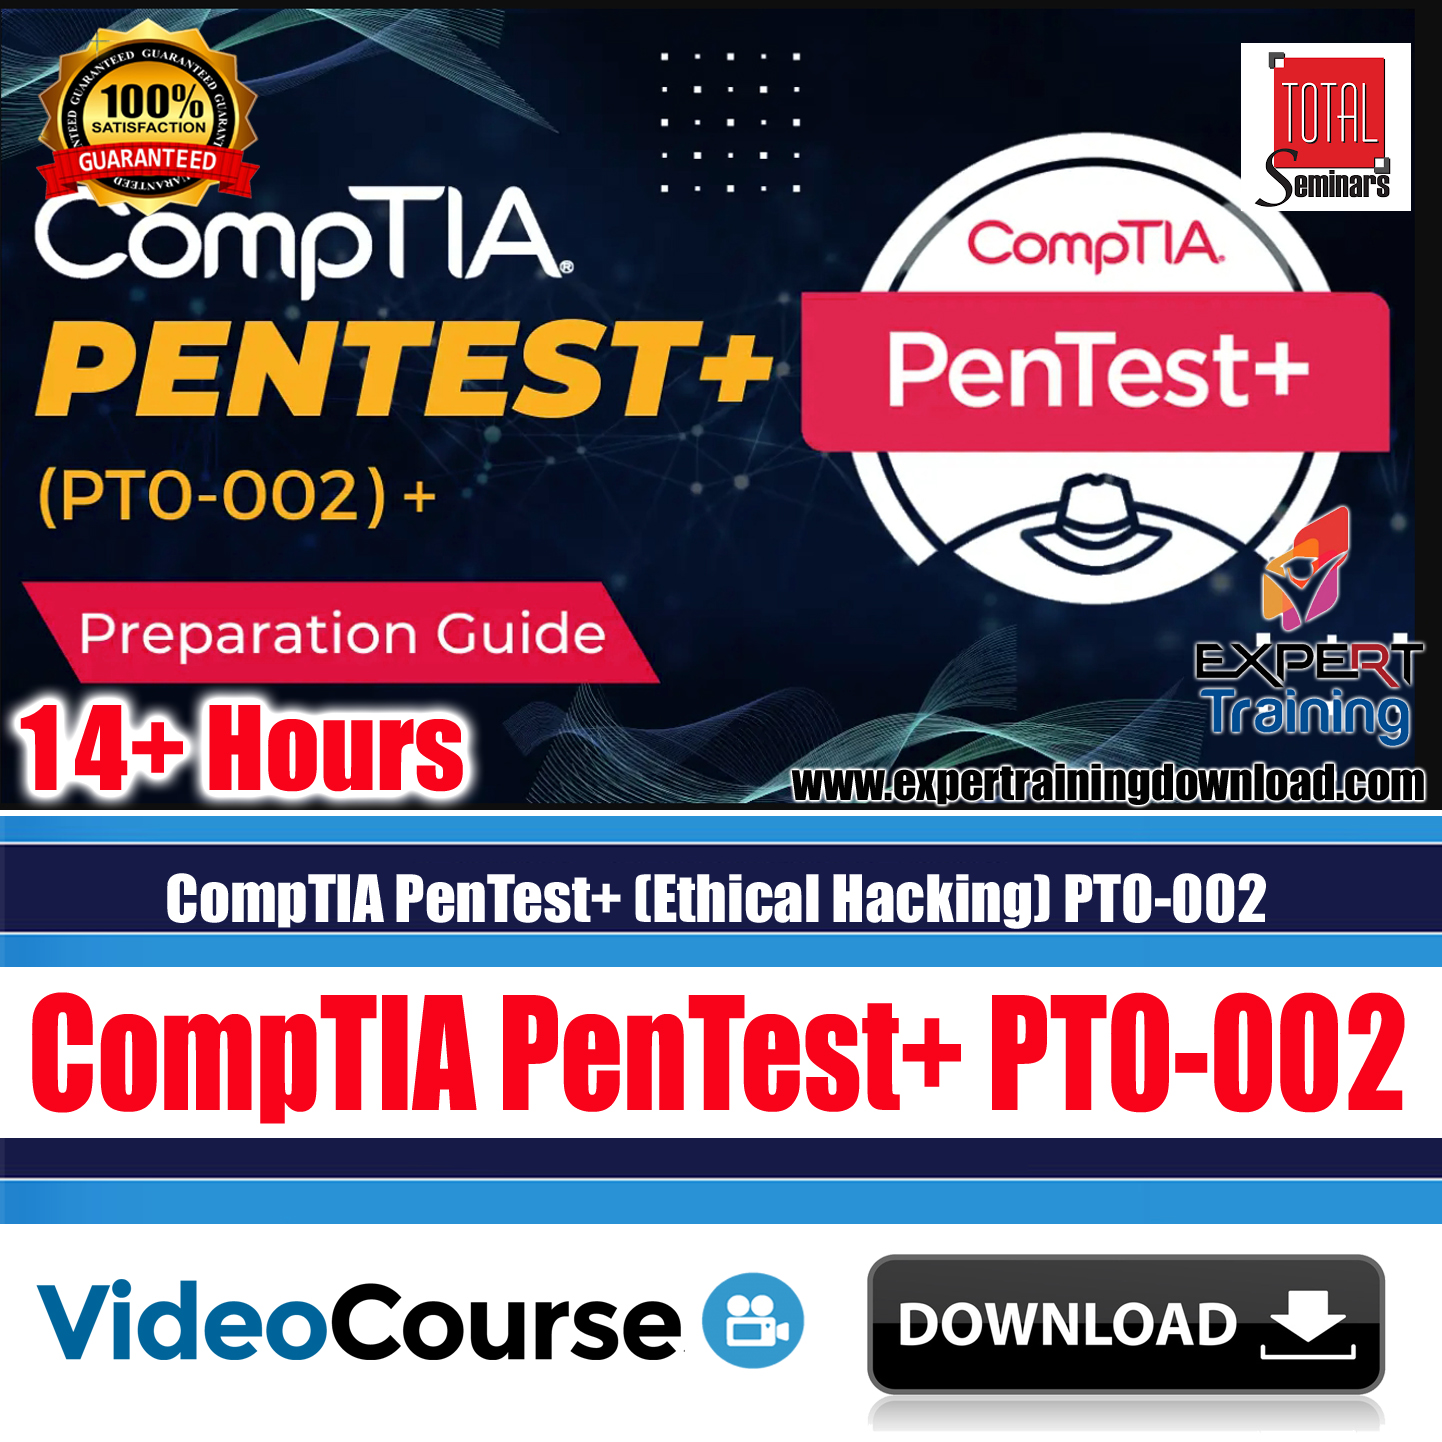 CompTIA PenTest+ (Ethical Hacking) PT0-002